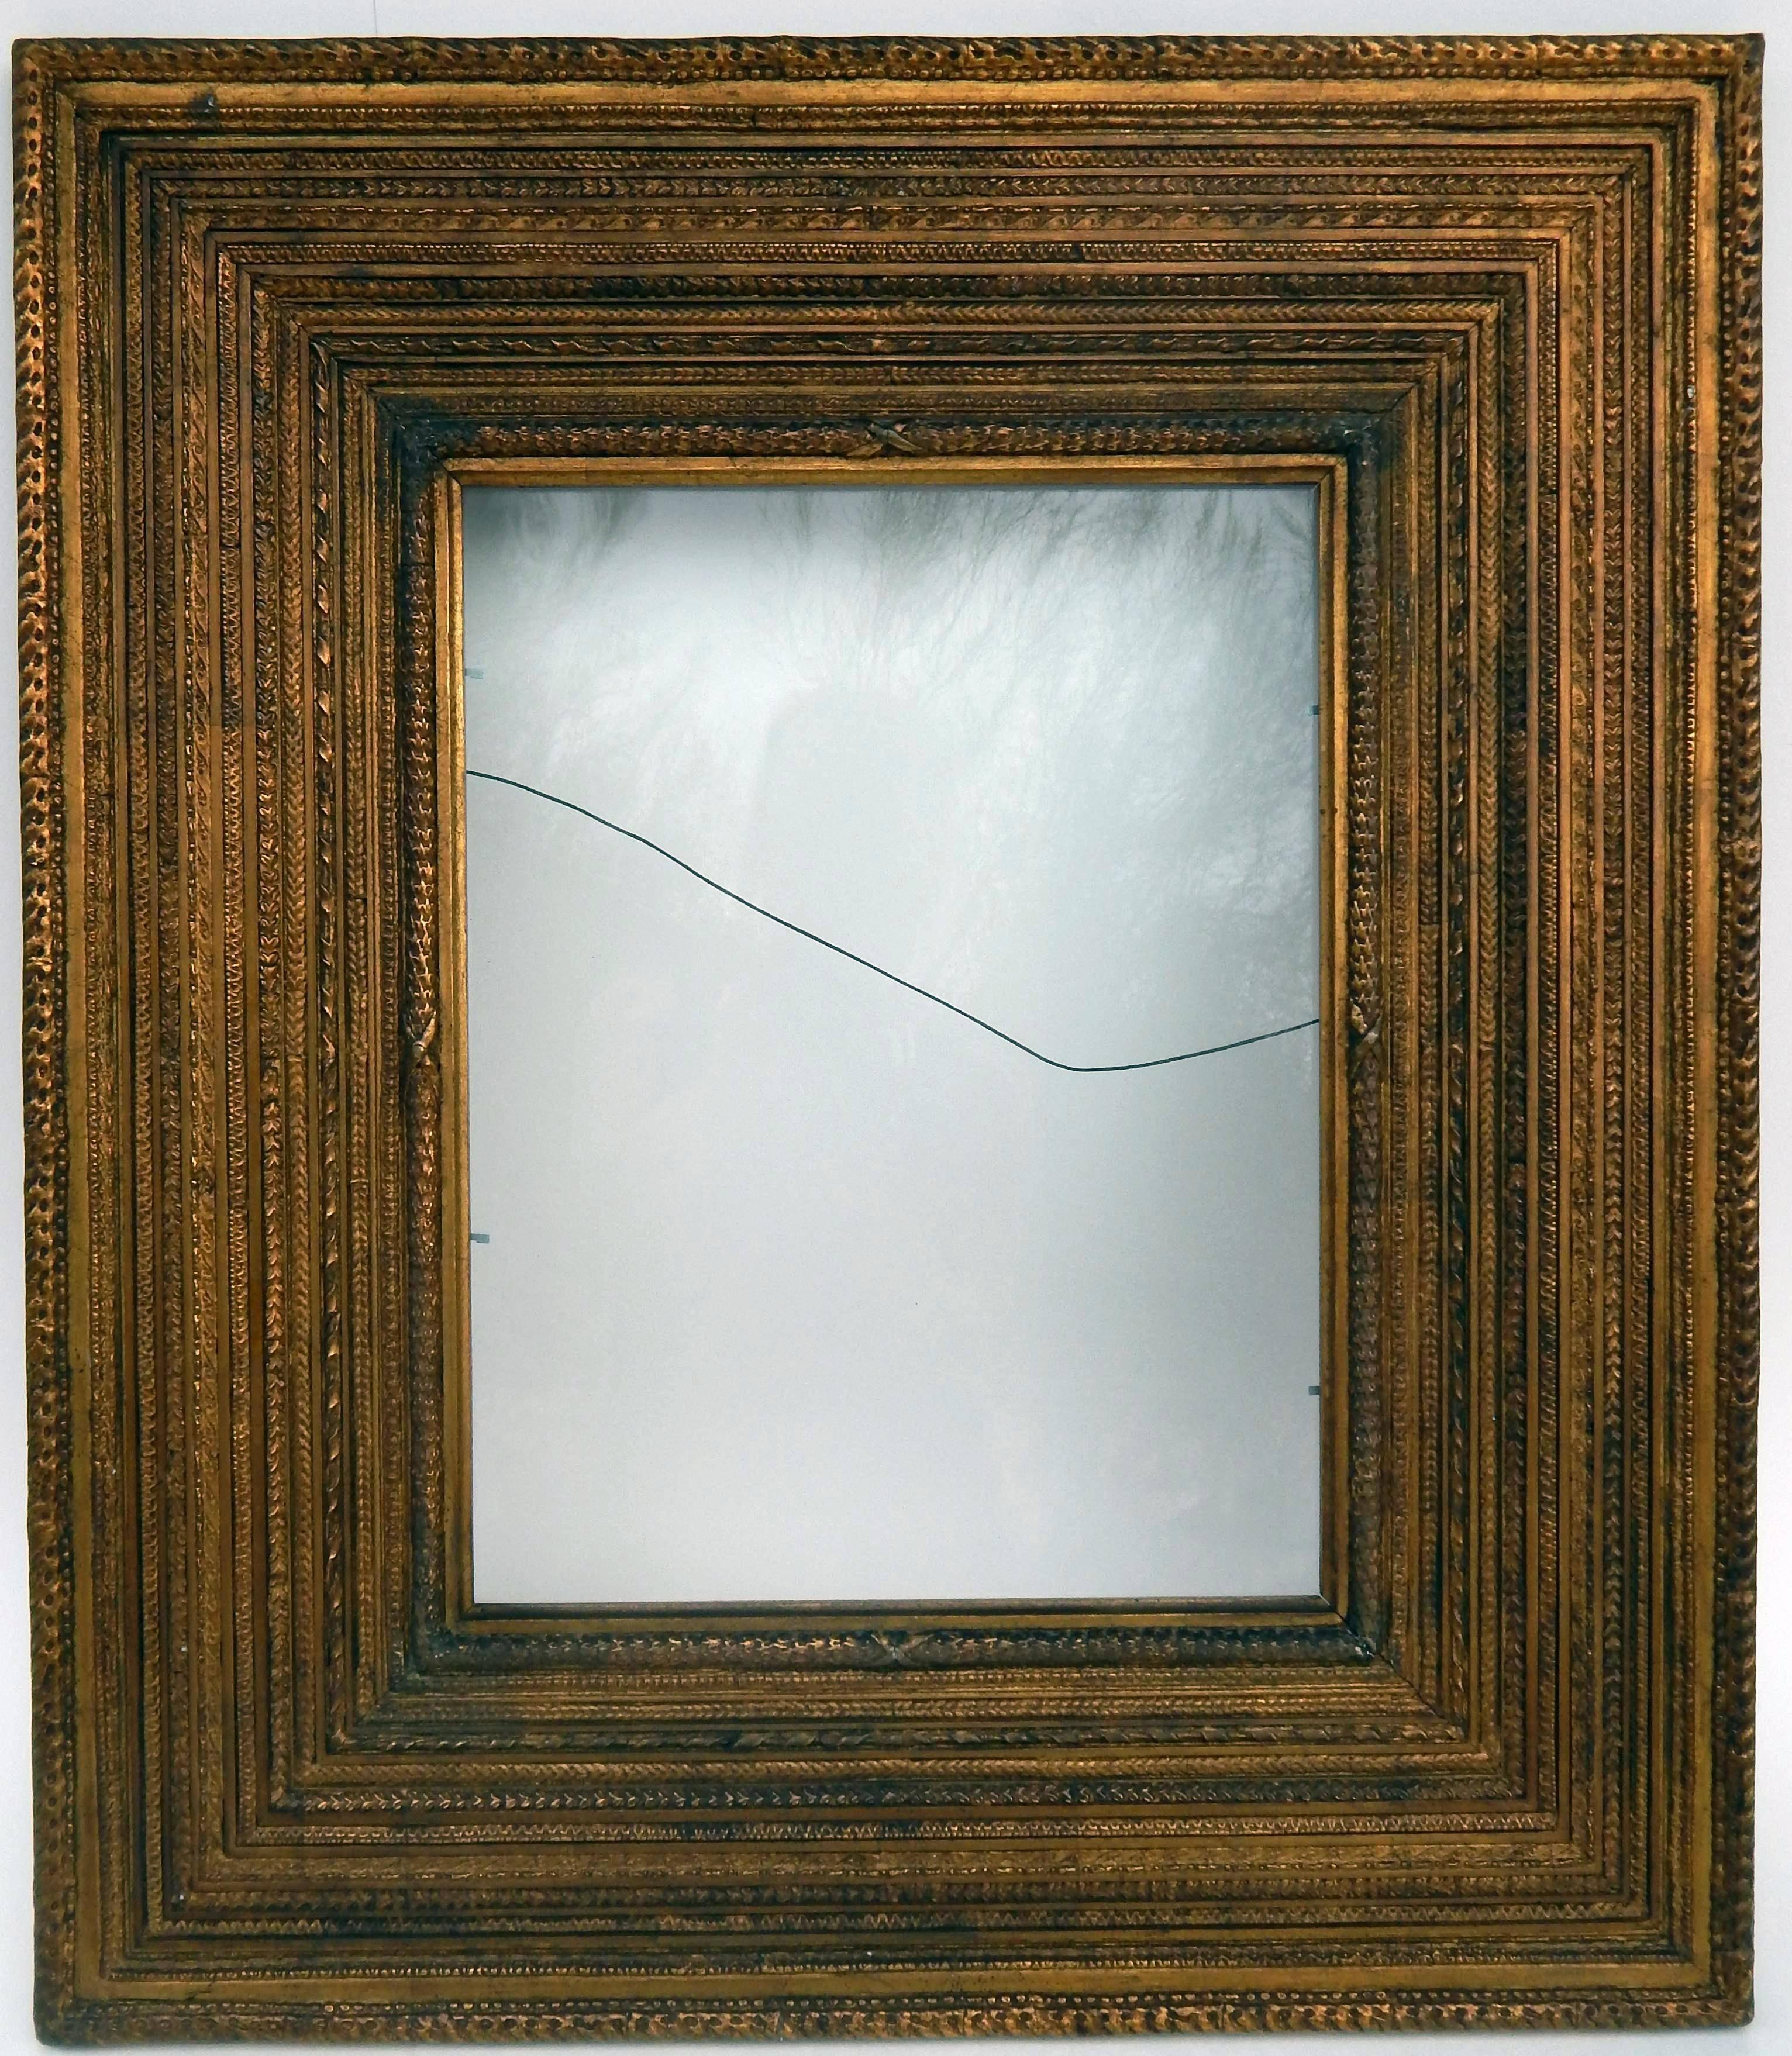 This item is a rare and extraordinary original vintage frame by Stanford White, one of the most important figures in American frame history, as well as a member of the prominent architecture firm McKim, Mead & White at the turn of the 20th